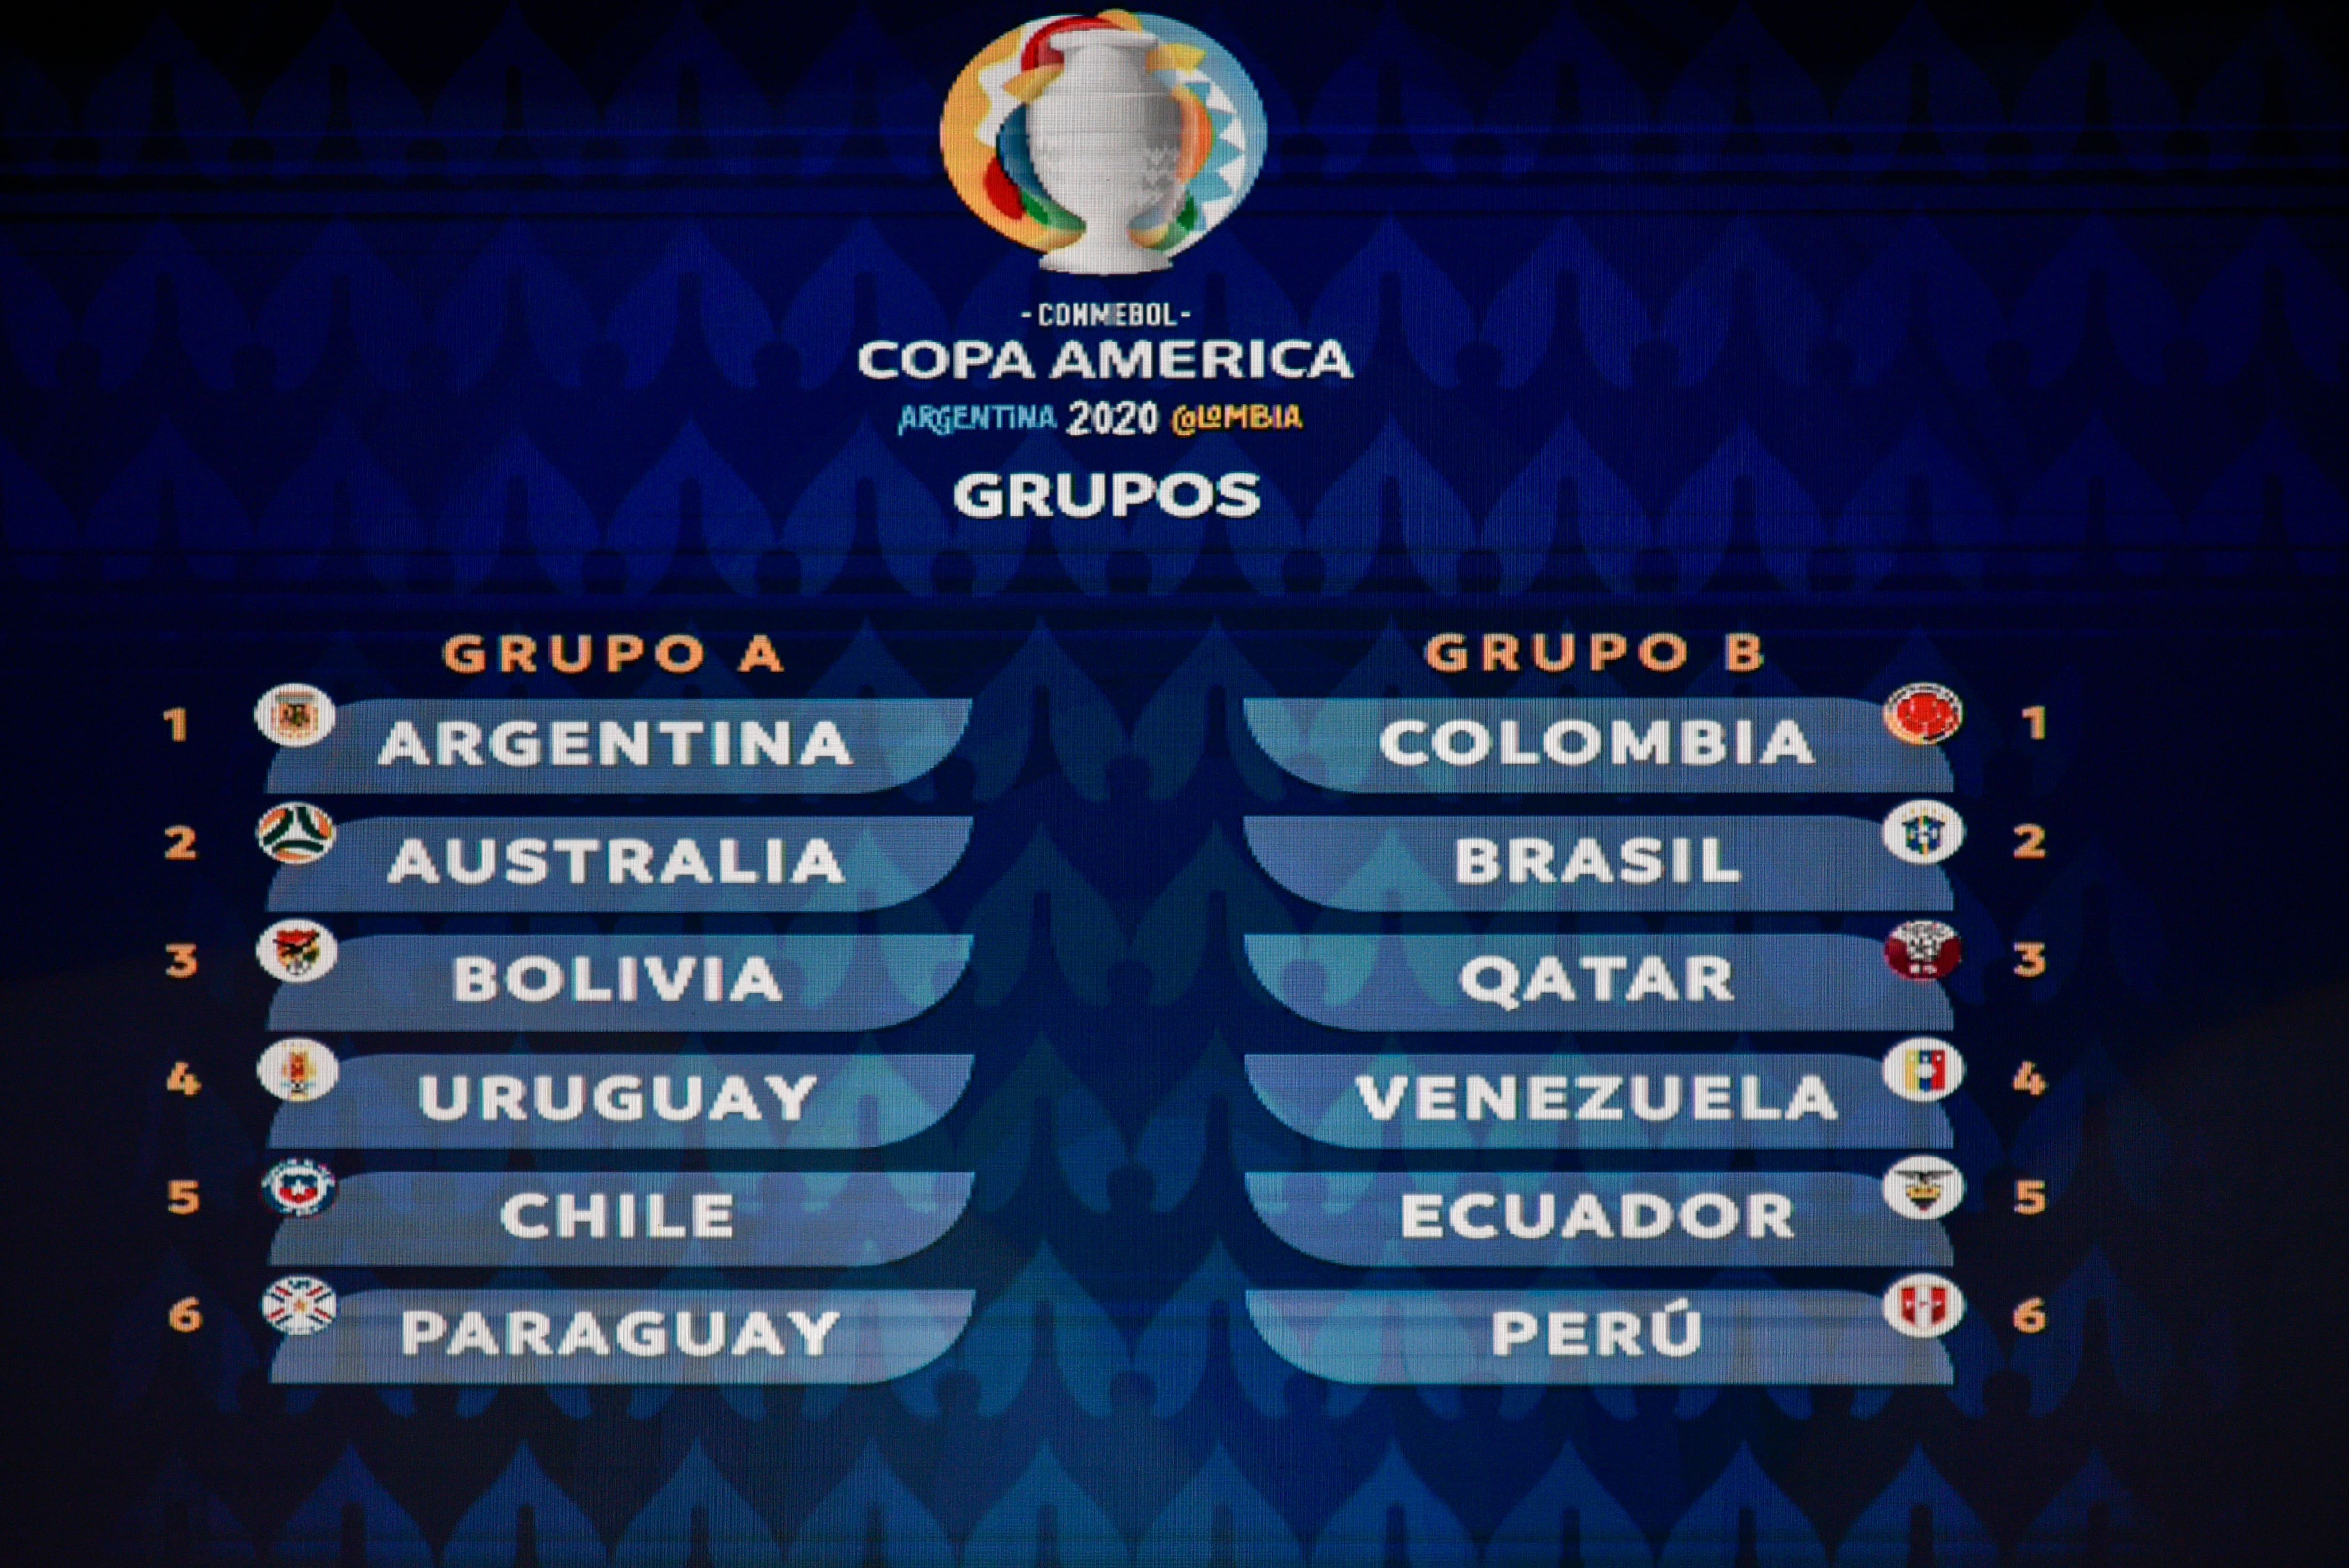 CARTAGENA, COLOMBIA - DECEMBER 03: Final groups for Copa America 2020 are displayed on the big screen during the draw for Copa America 2020 co-hosted by Argentina and Colombia at Centro de Convenciones de Cartagena de Indias on December 03, 2019 in Cartagena, Colombia.  (Photo by Guillermo Legaria/Getty Images)